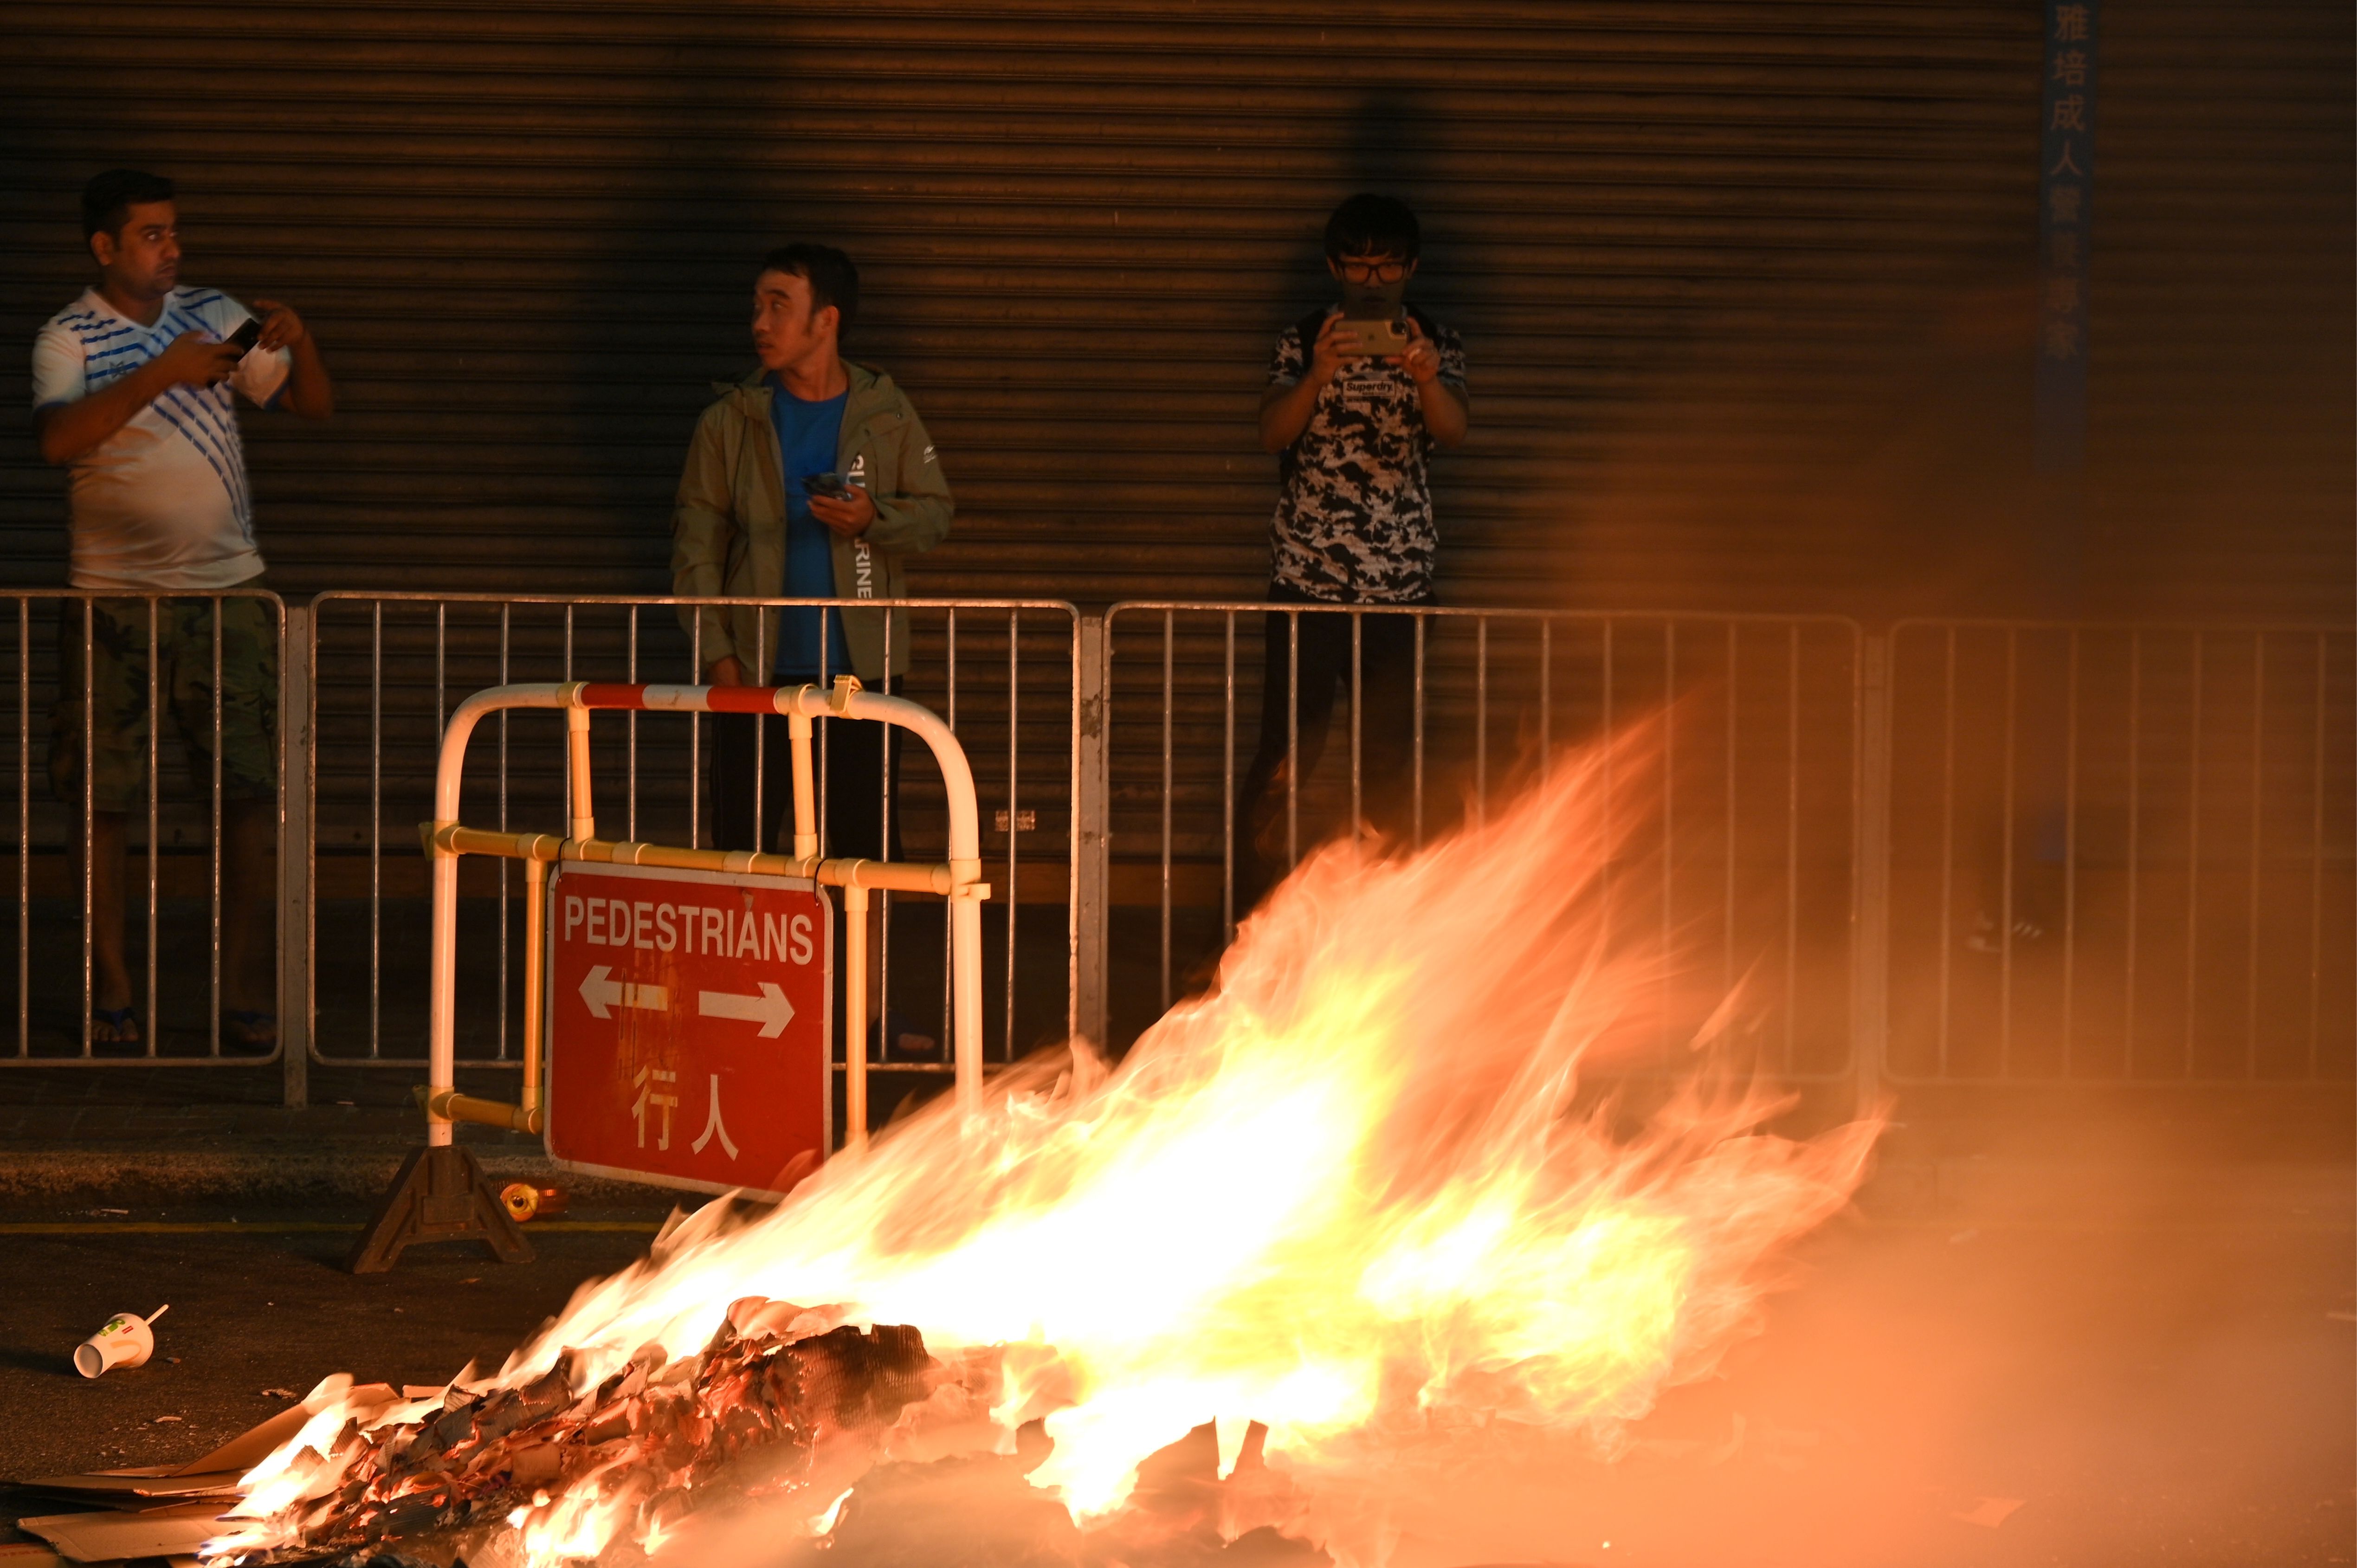 Bystanders record footage with their mobile phones as a barricade set up by protesters burns.